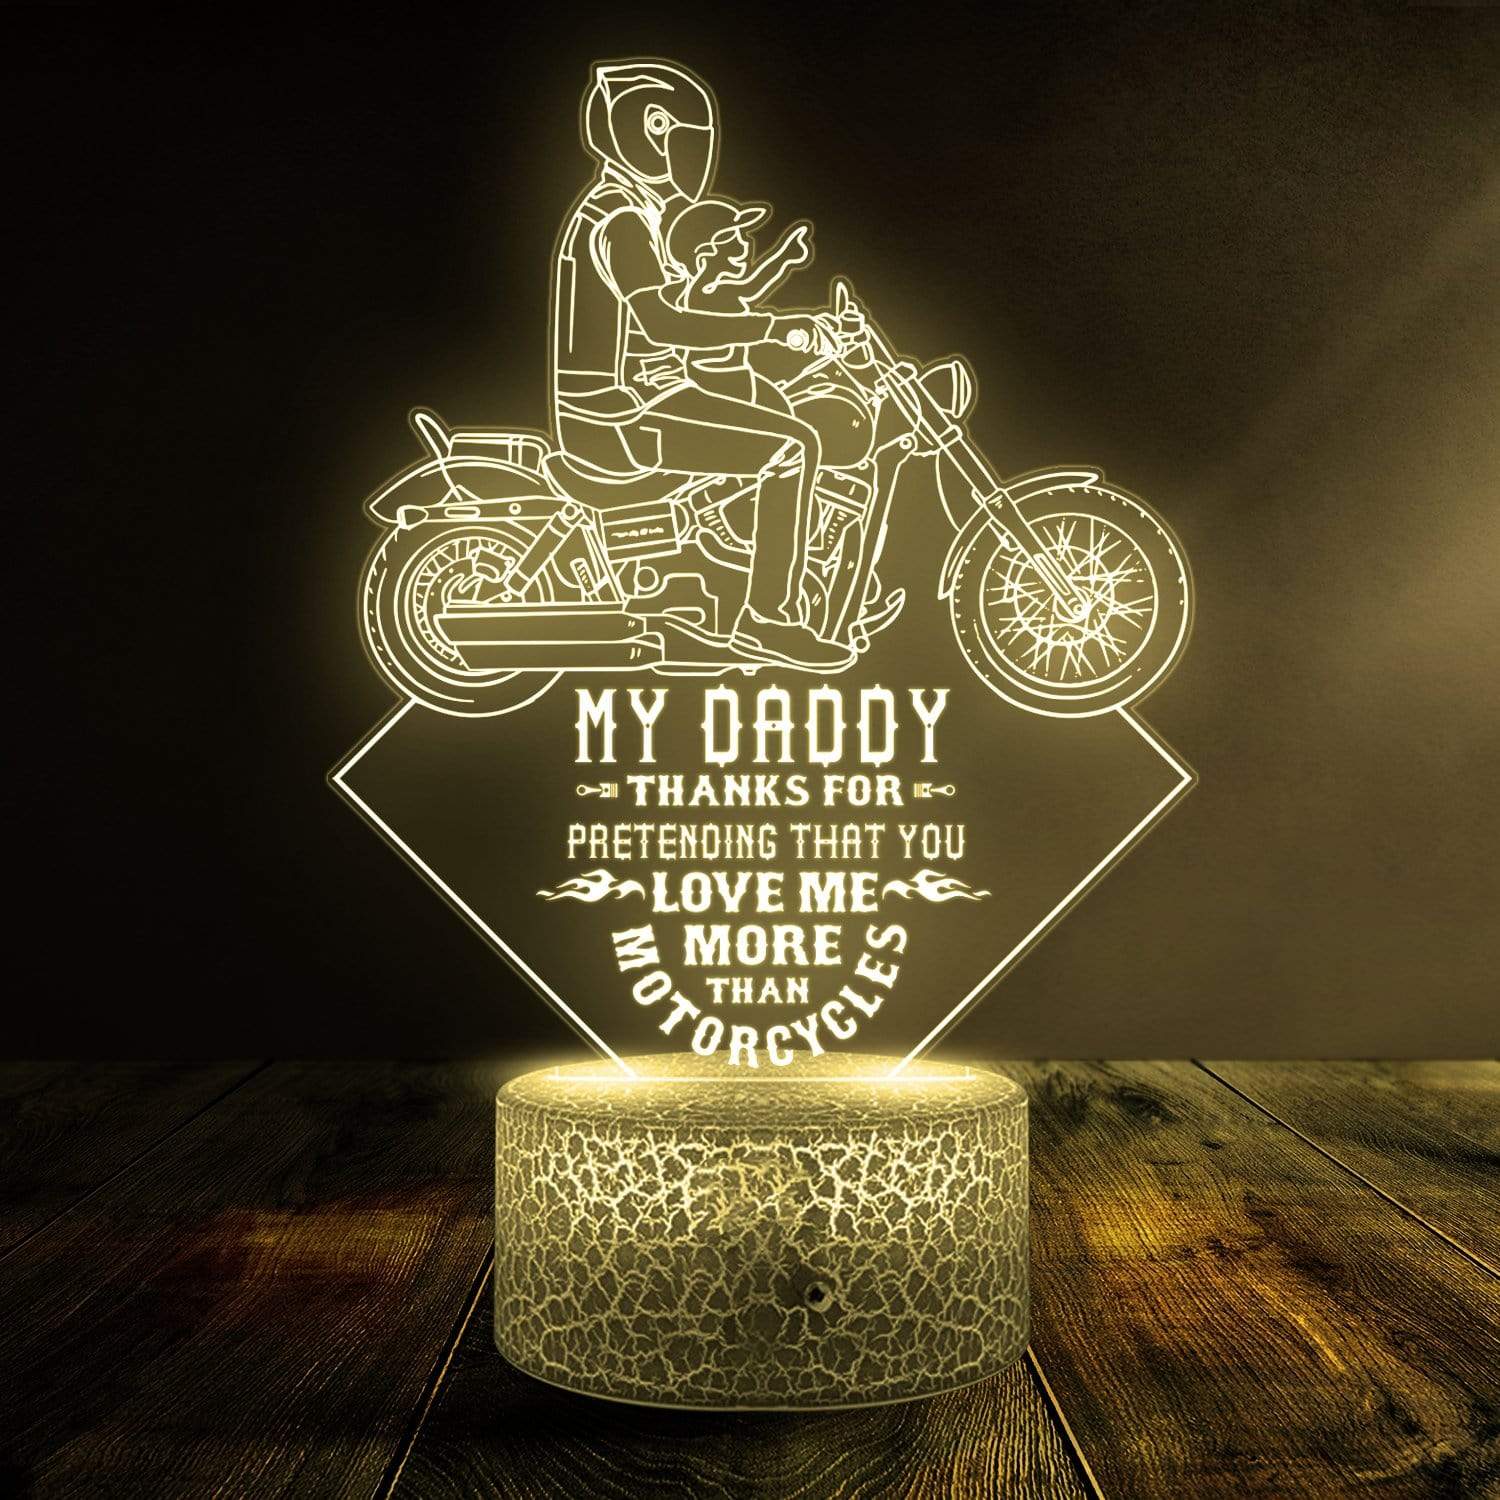 This 3D LED biker light casts a warm, illuminating glow, perfect for Dad's space.